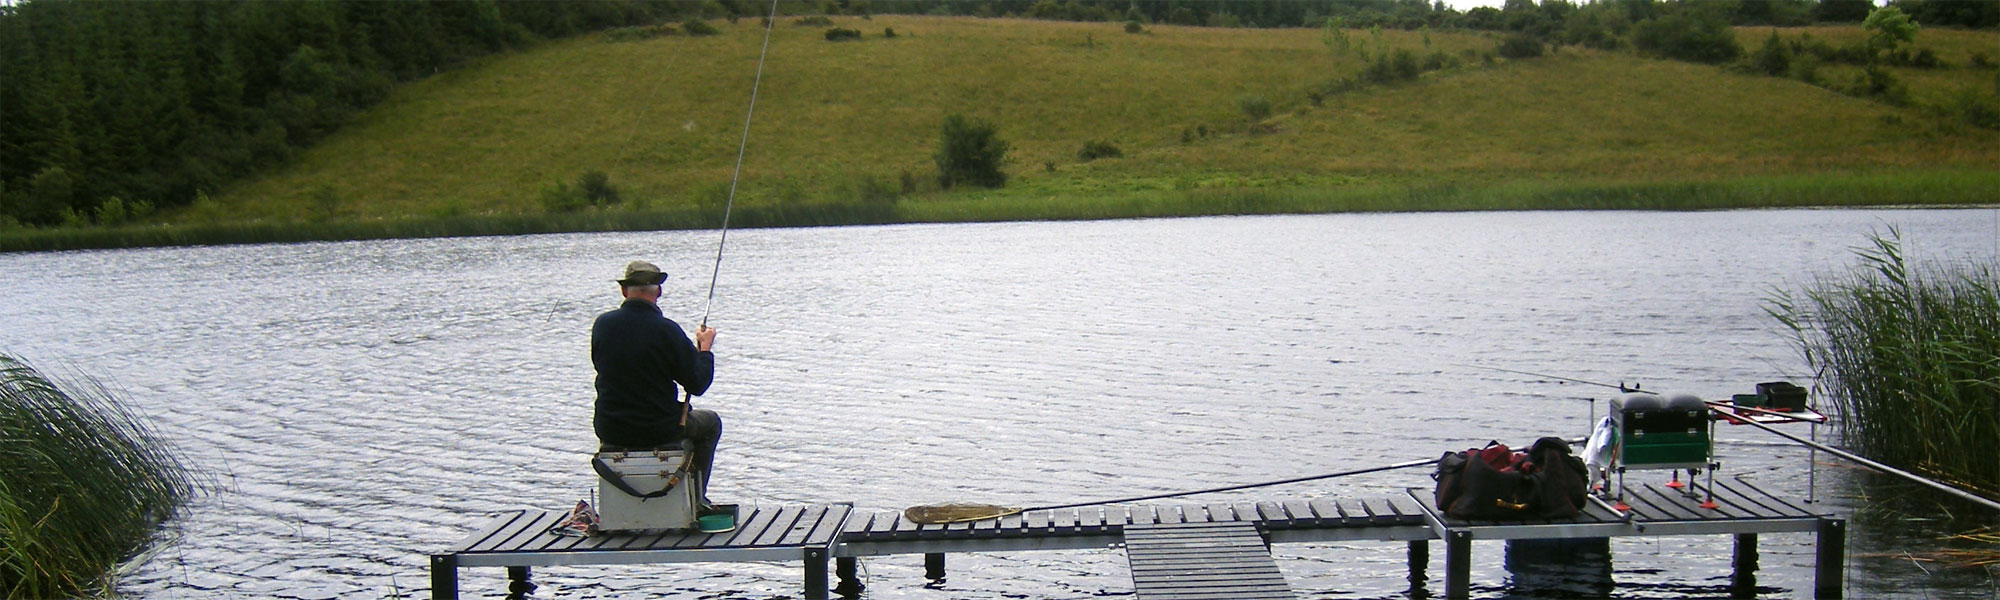 Fishing in Ireland with FIsh Tracker Angling Guide